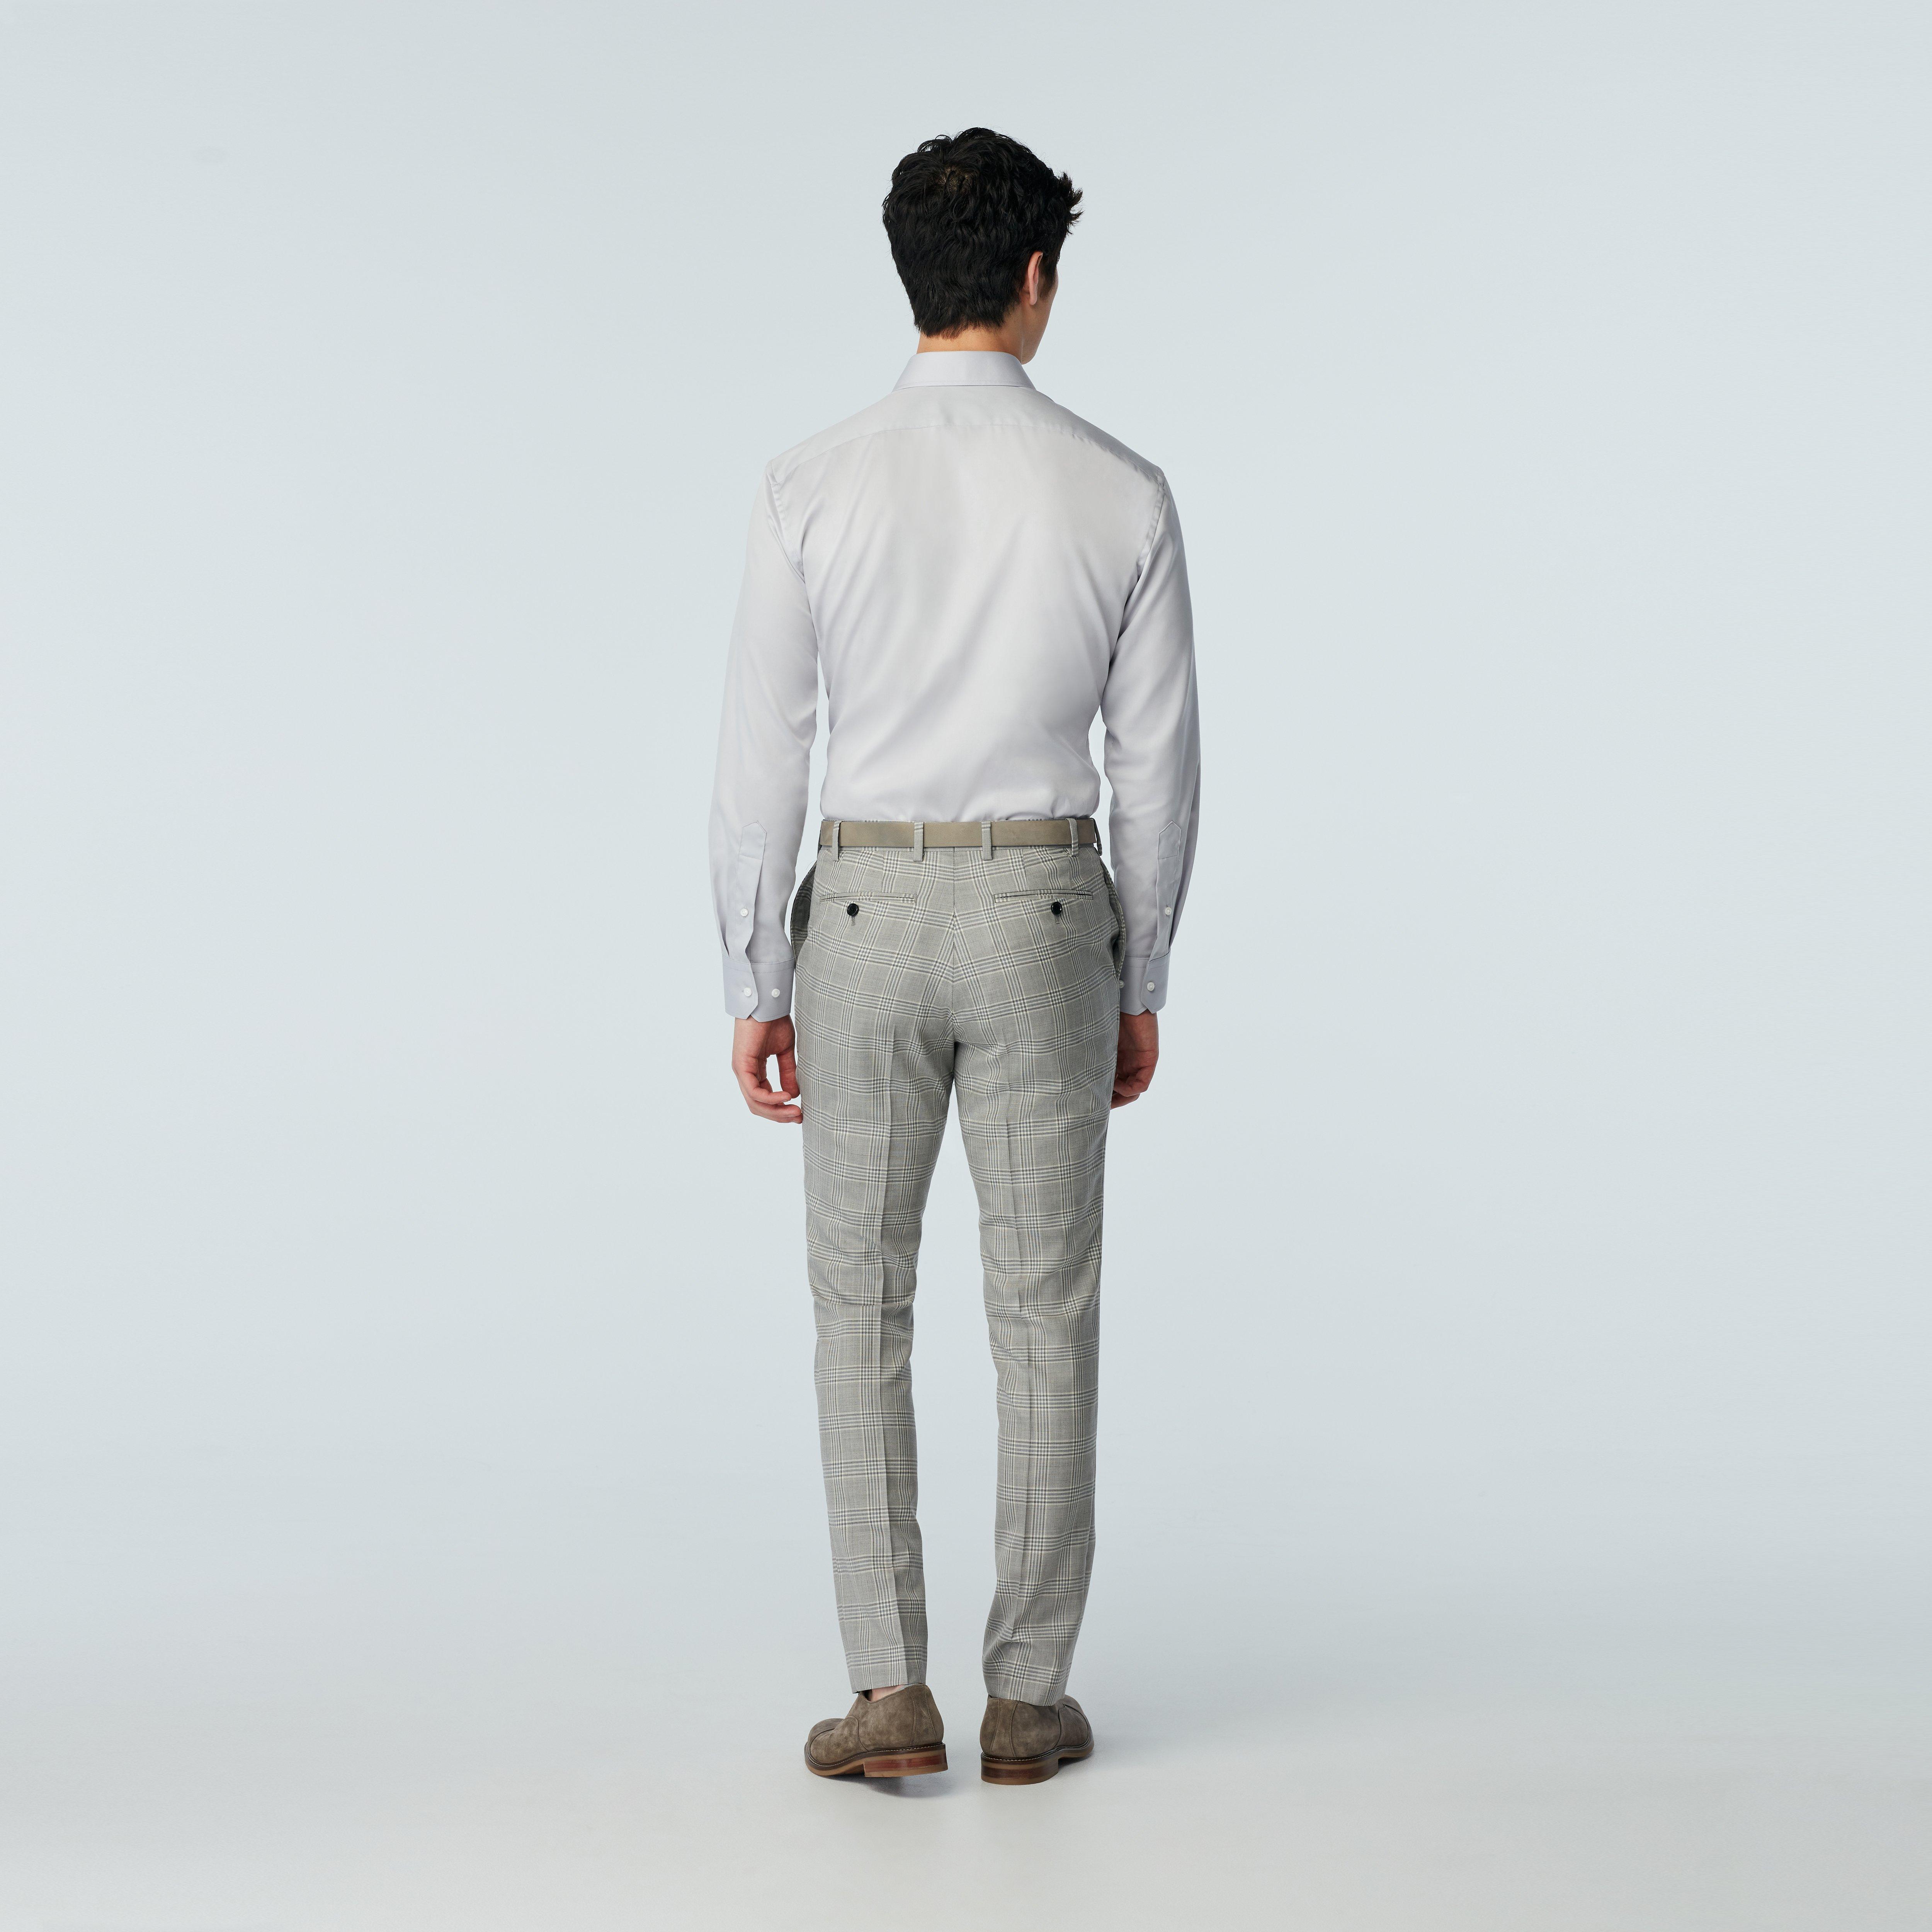 Custom Suits Made For You - Lydney Check Light Gray Suit | INDOCHINO